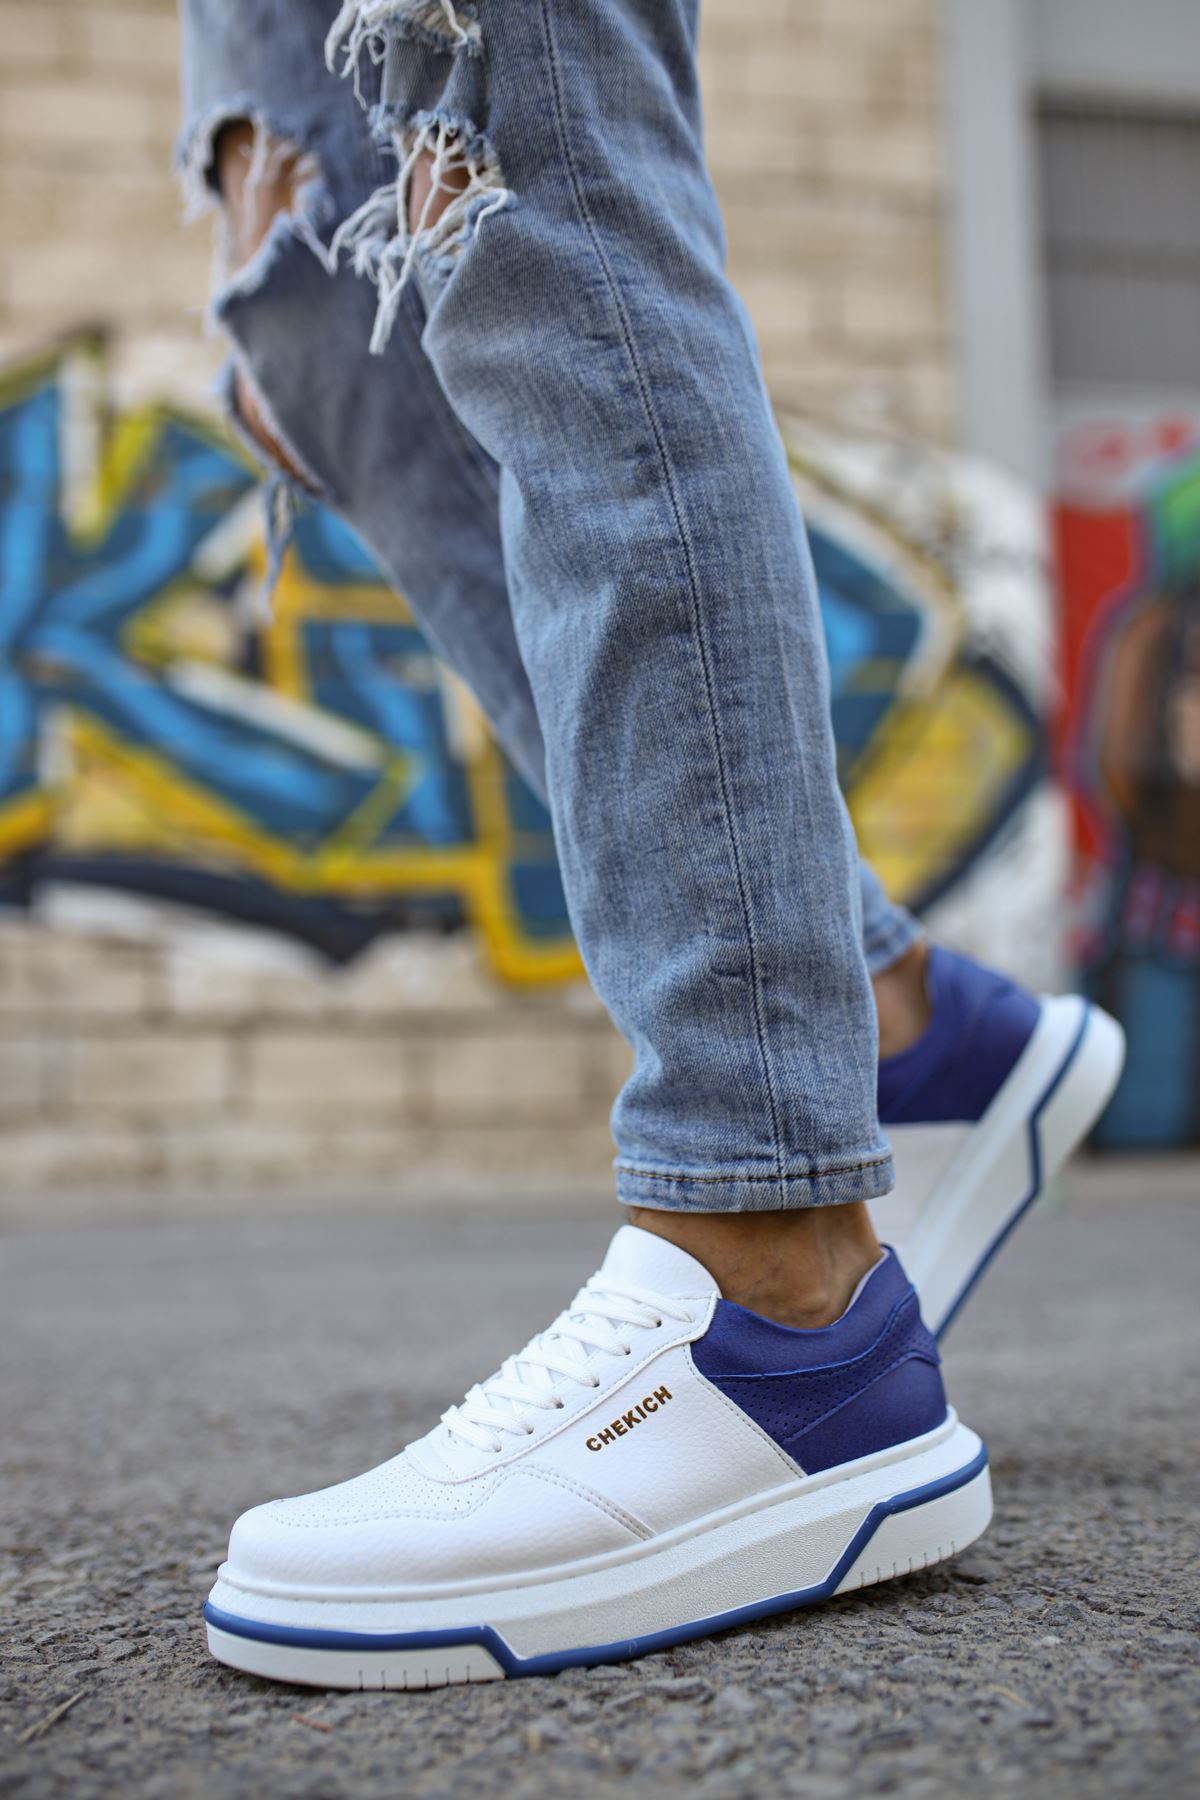 CH075 Men's Unisex White-Blue Casual Sneaker Sports Shoes - STREETMODE ™